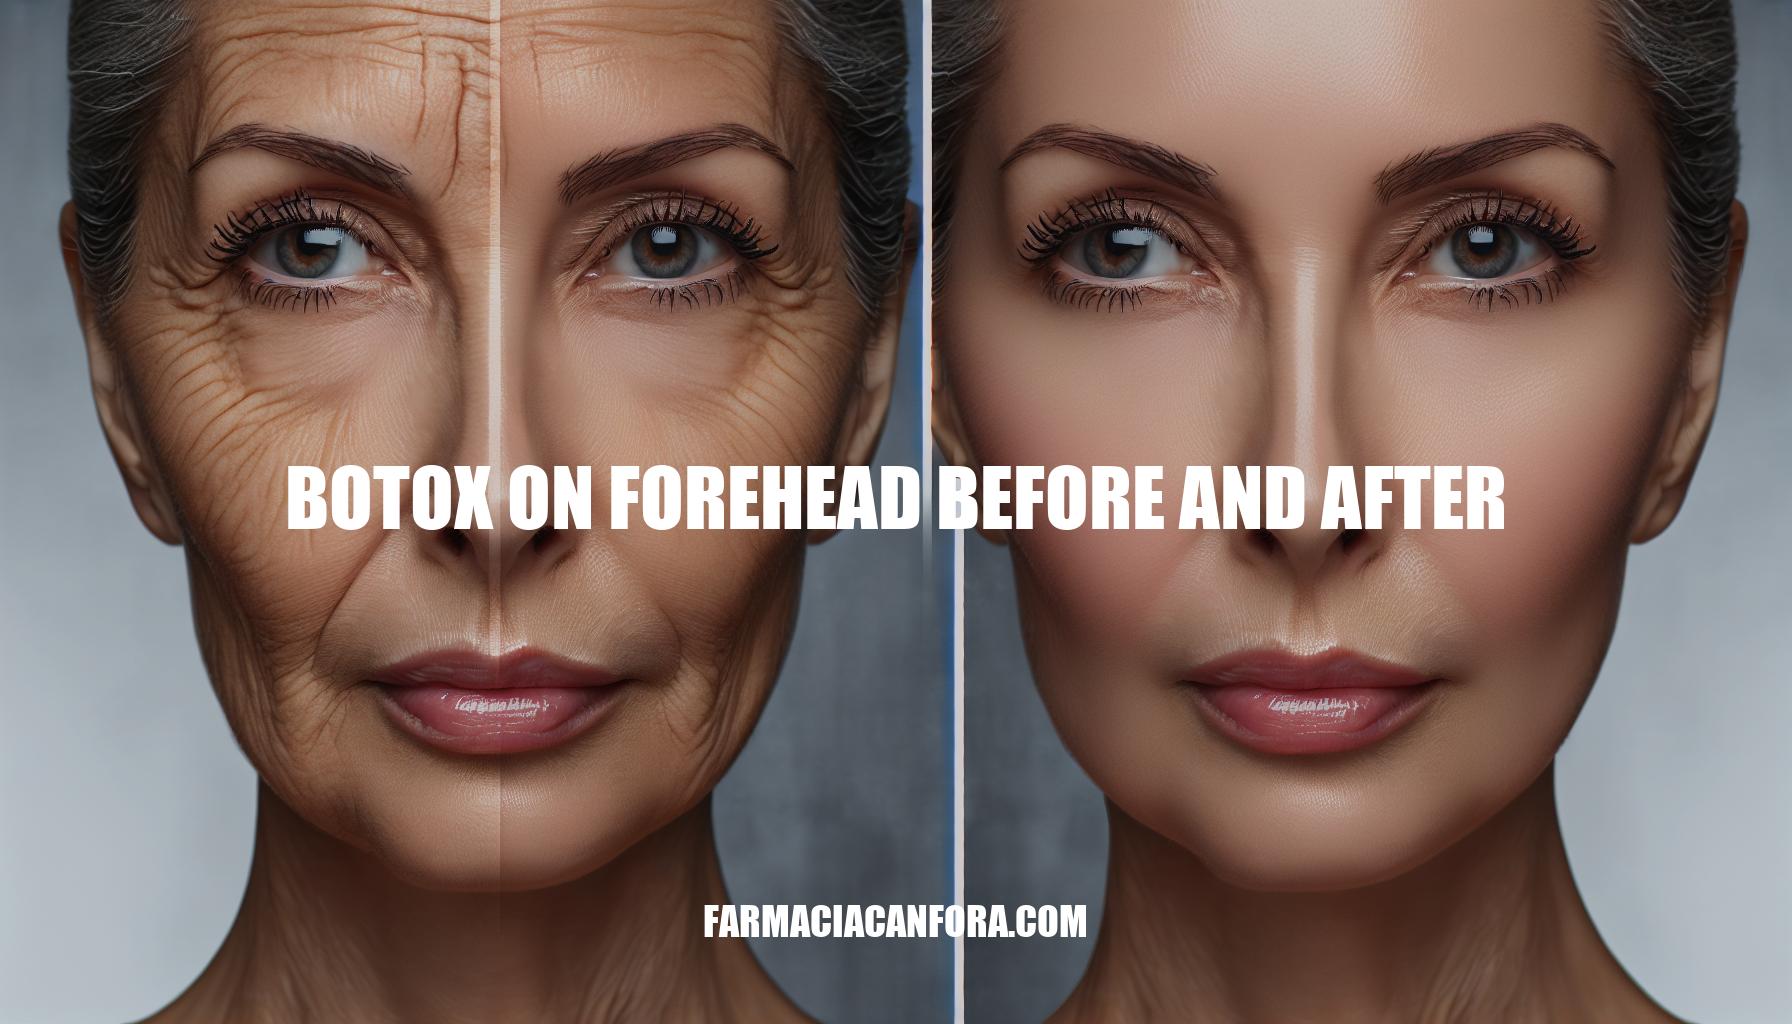 Botox on Forehead Before and After: Expert Guide